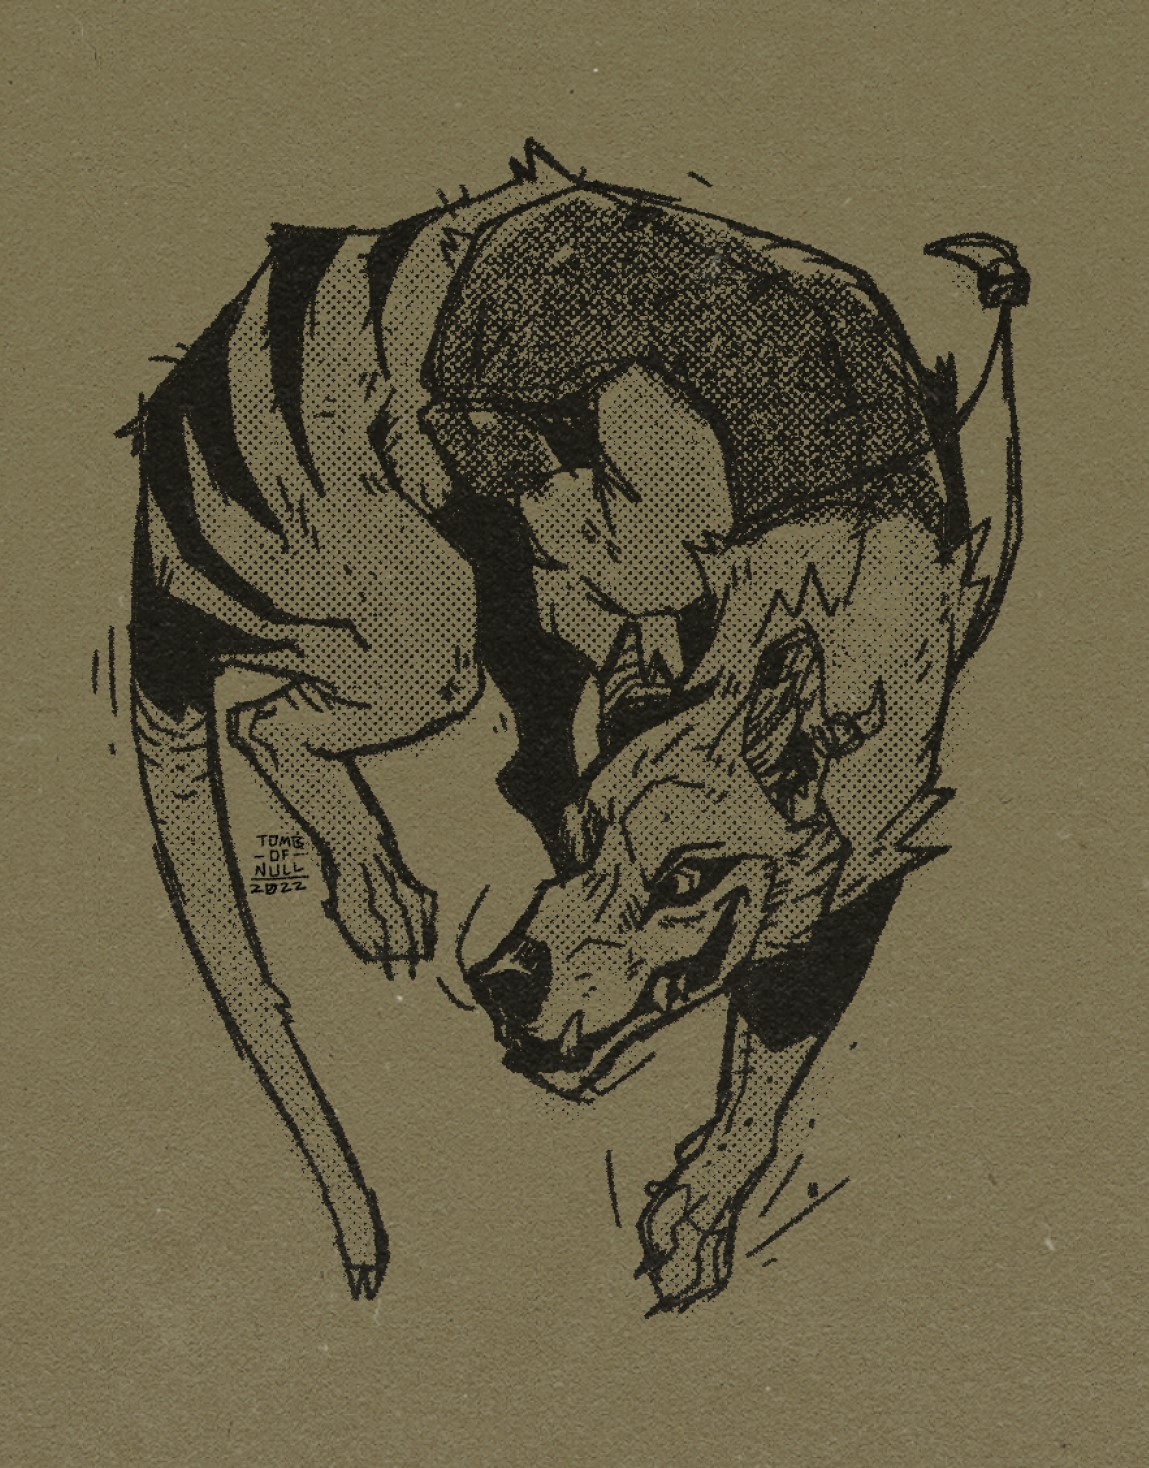 A sketch of a thylacine character with big teeth, a vest, and a charm necklace.